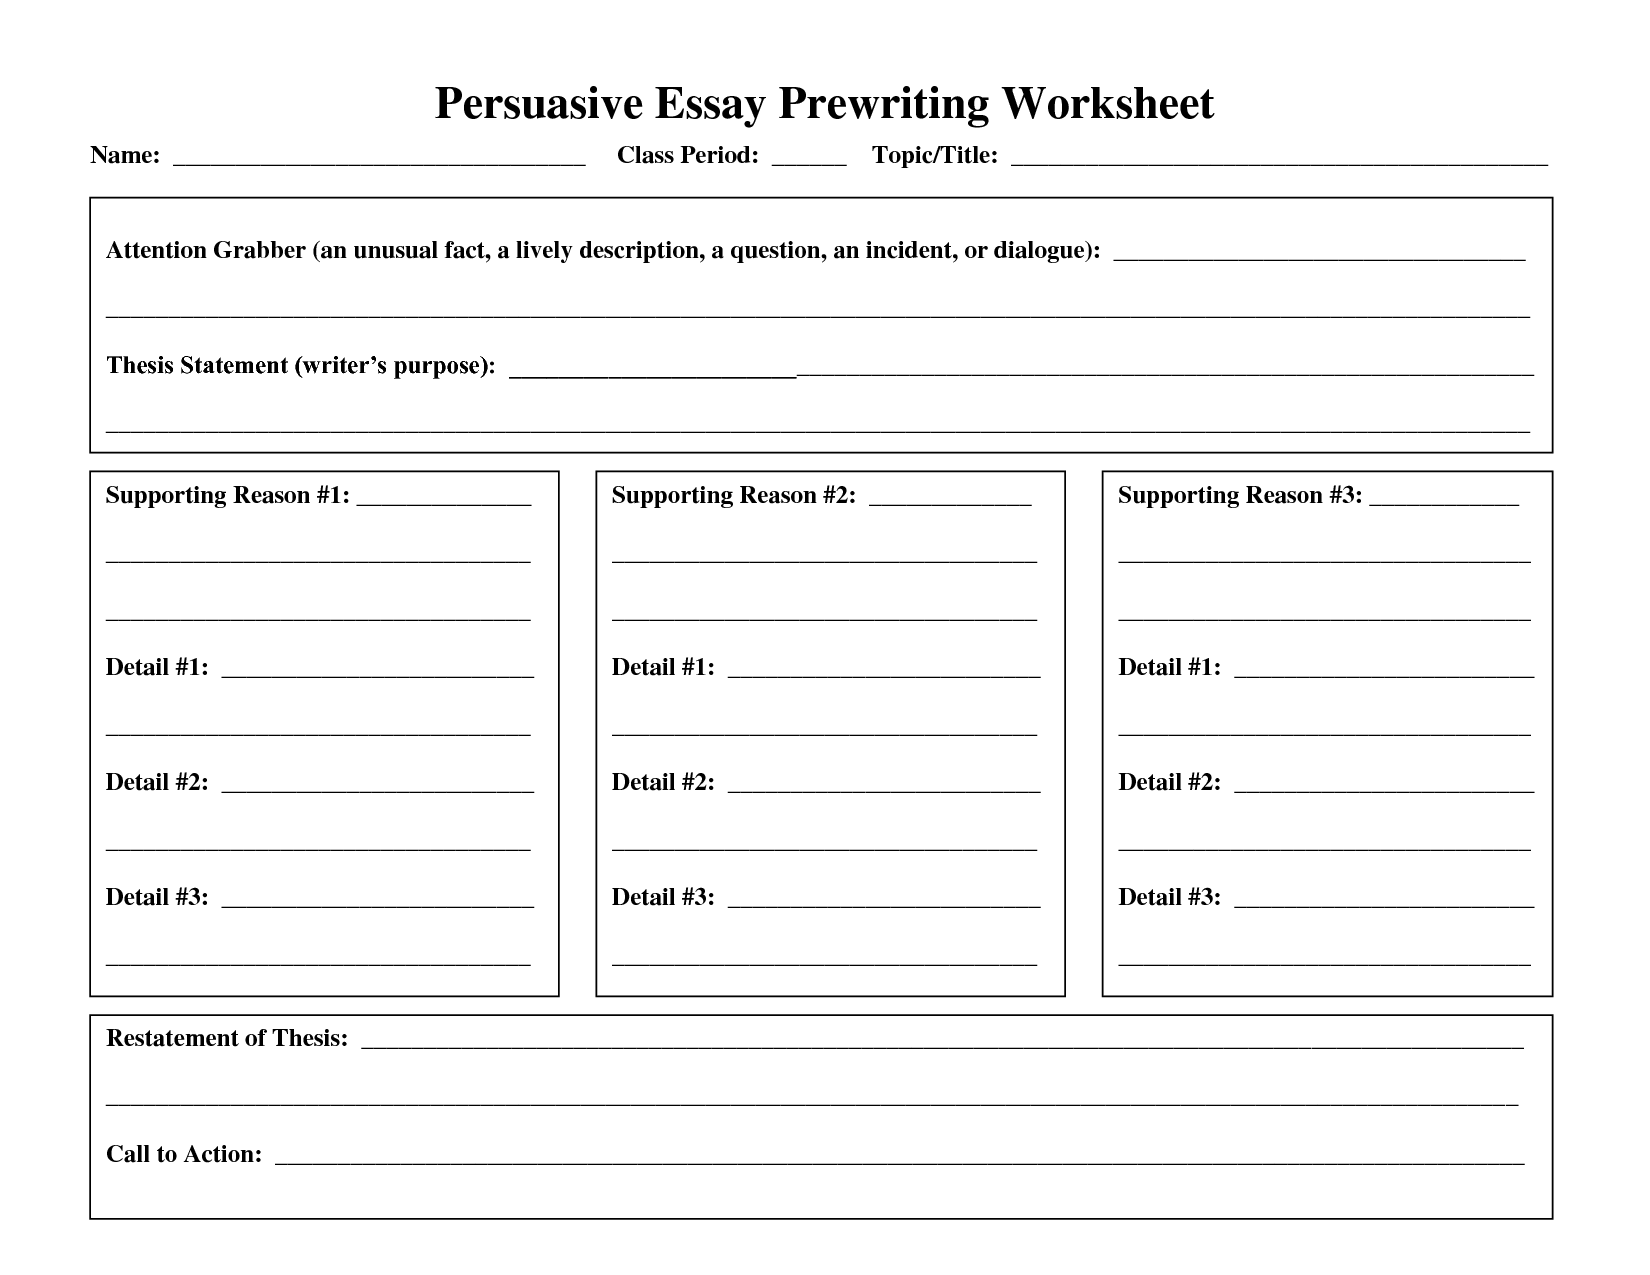 17-best-images-of-persuasive-writing-worksheets-persuasive-writing-prompt-worksheet-opinion